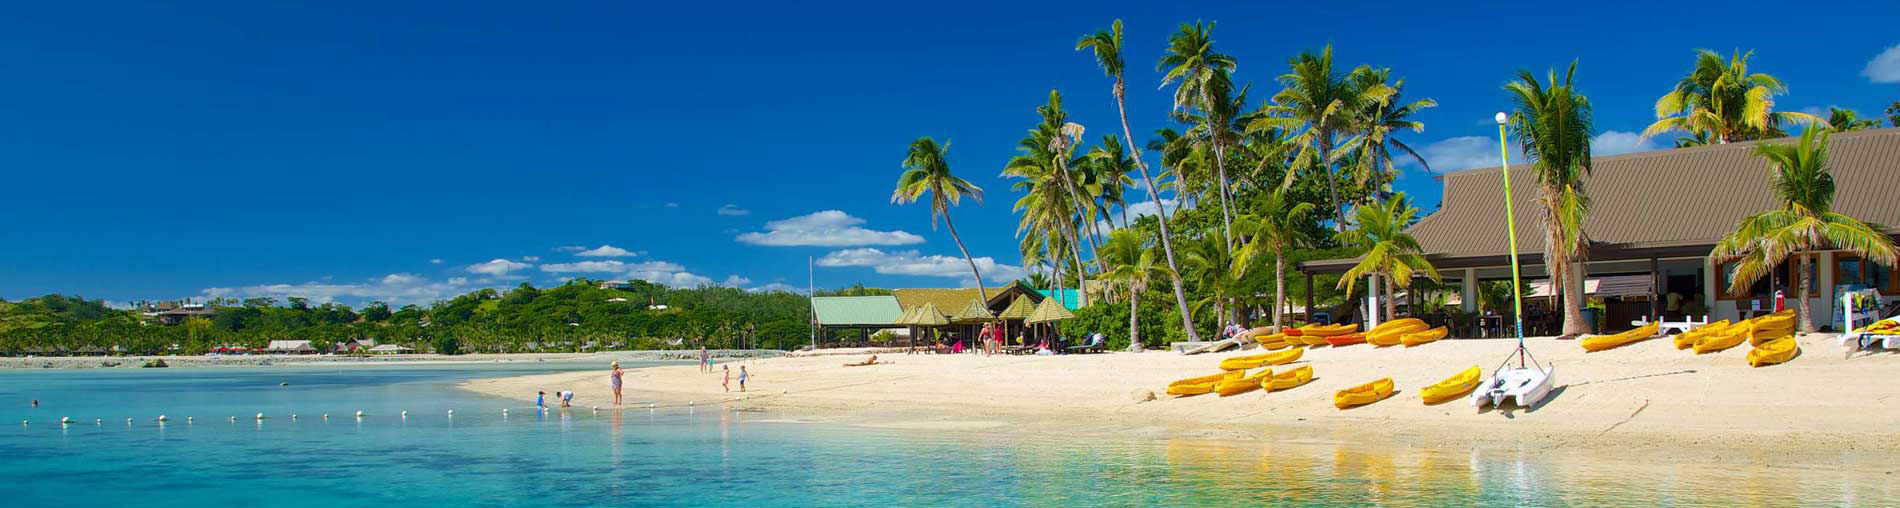 Places To Visit In Fiji Island